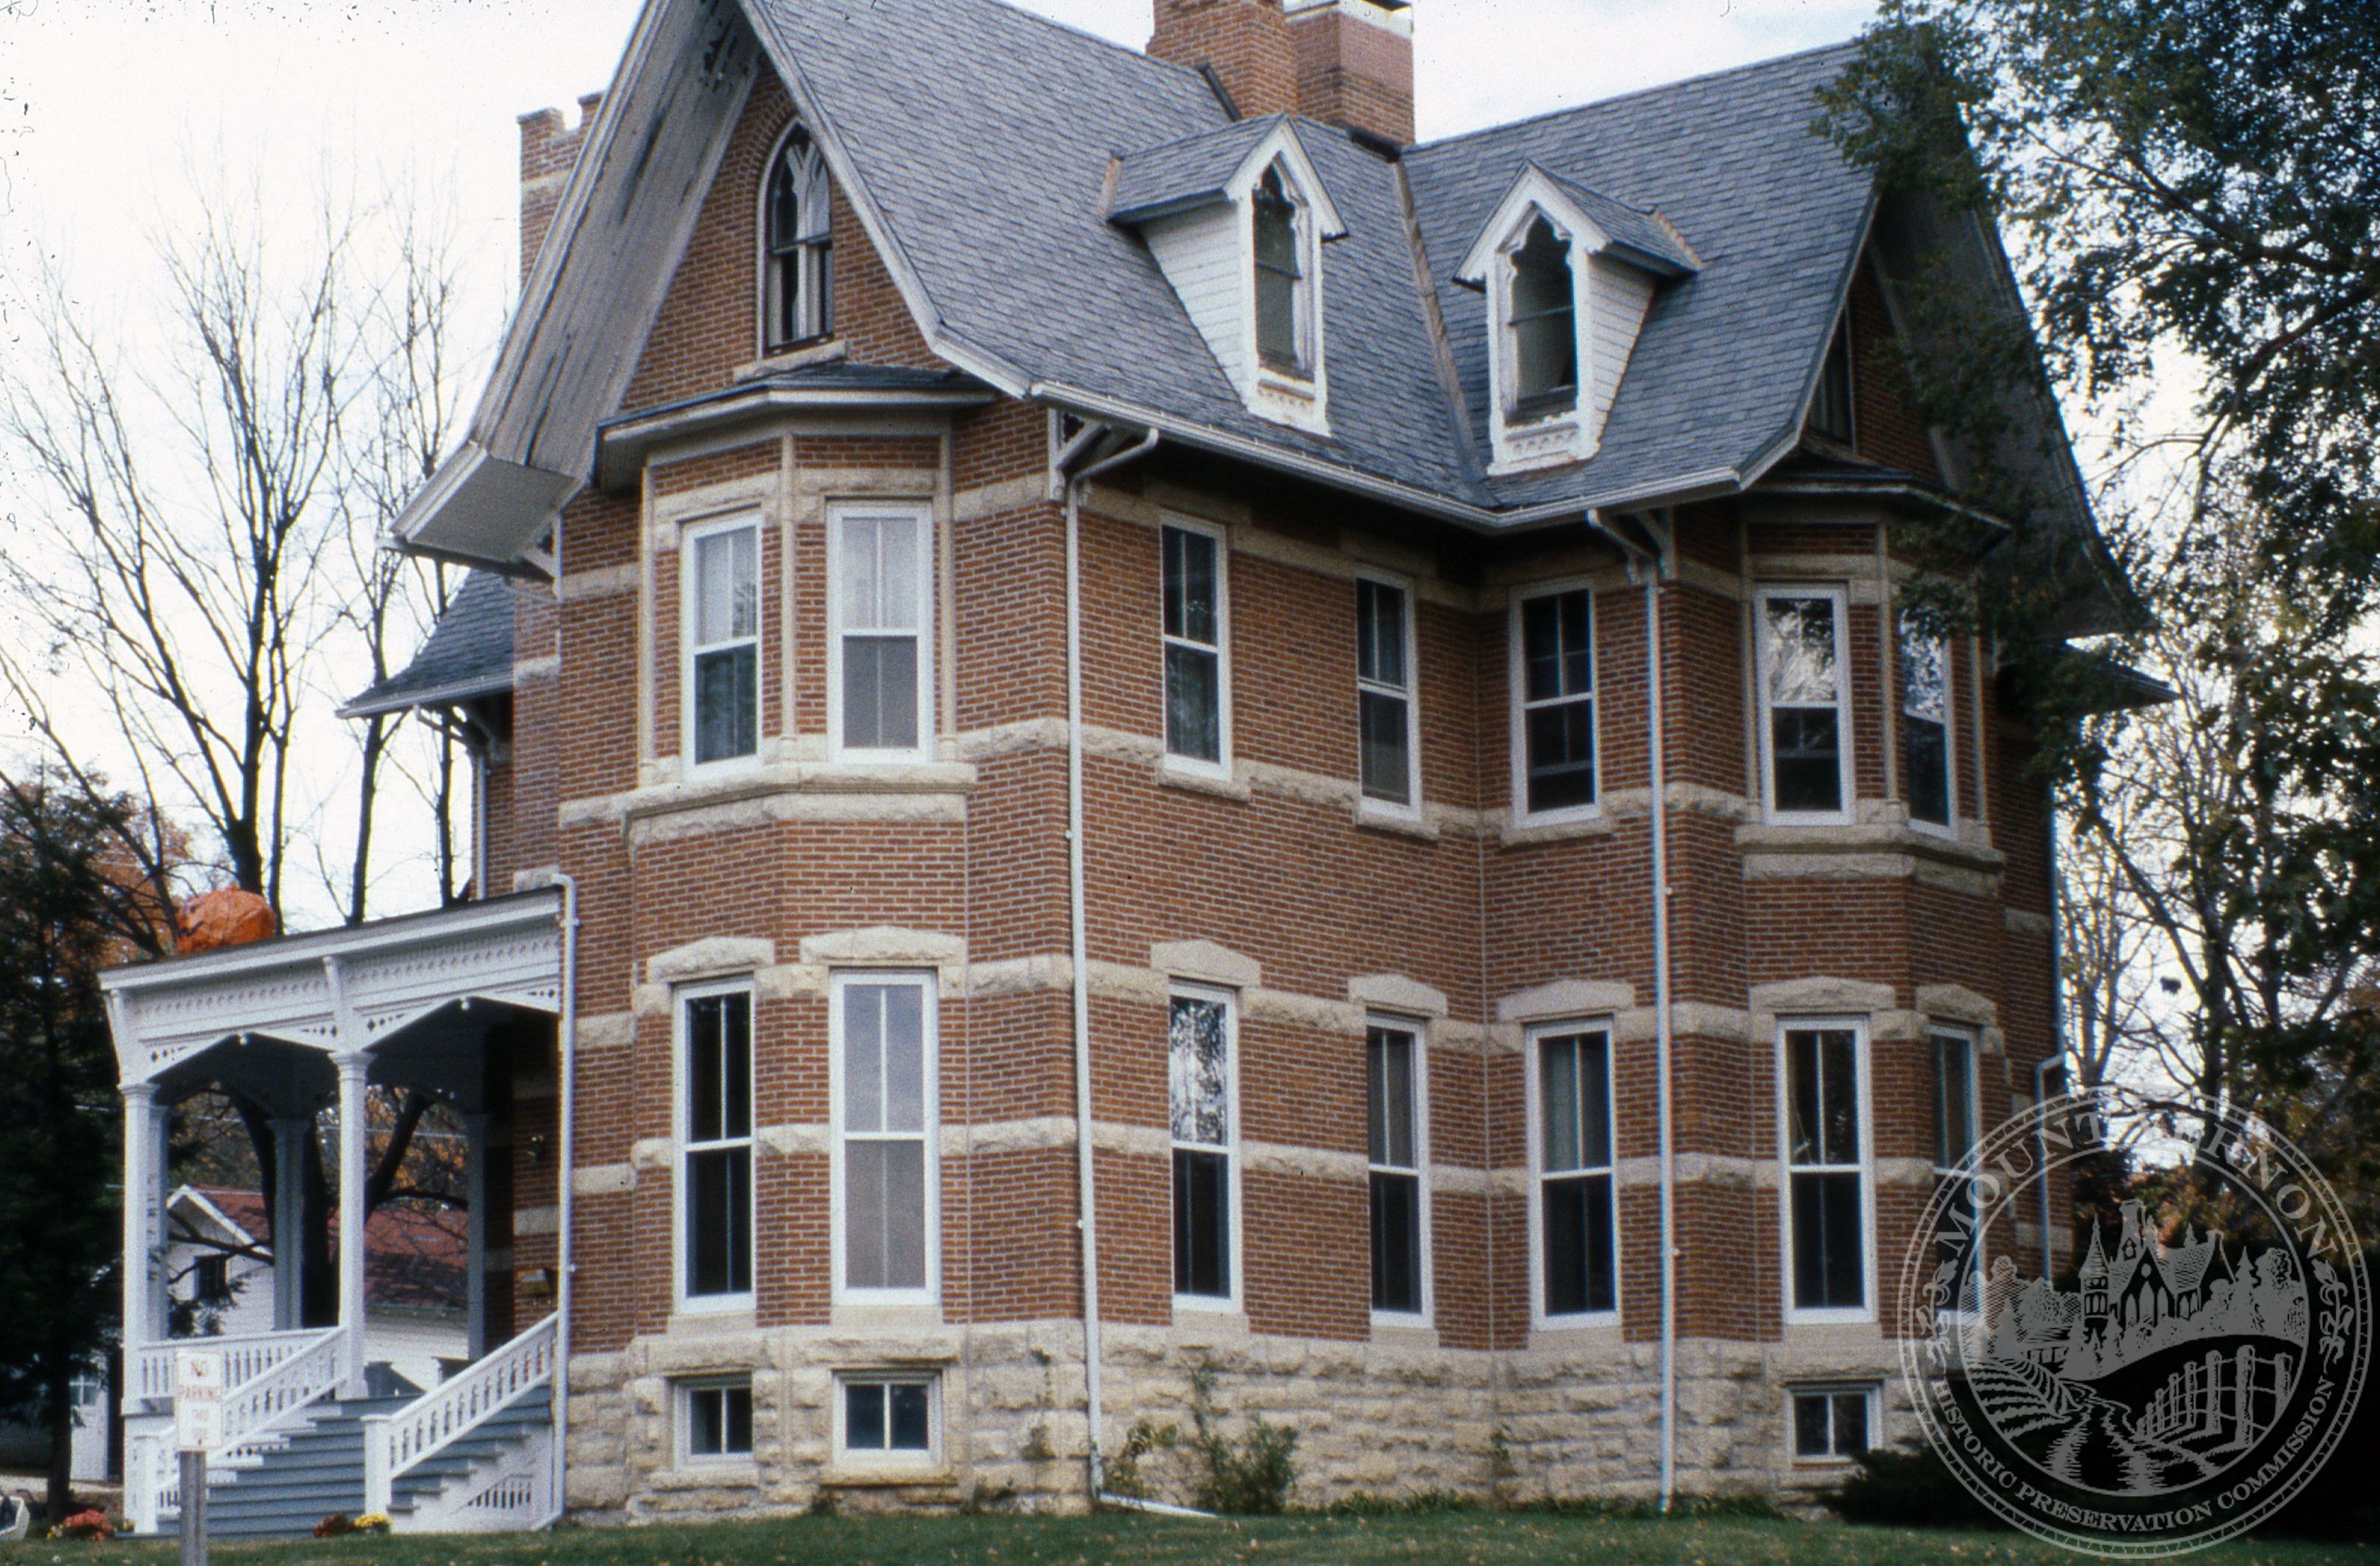 Photo of house at corner of 4th Avenue and 2nd Street SW